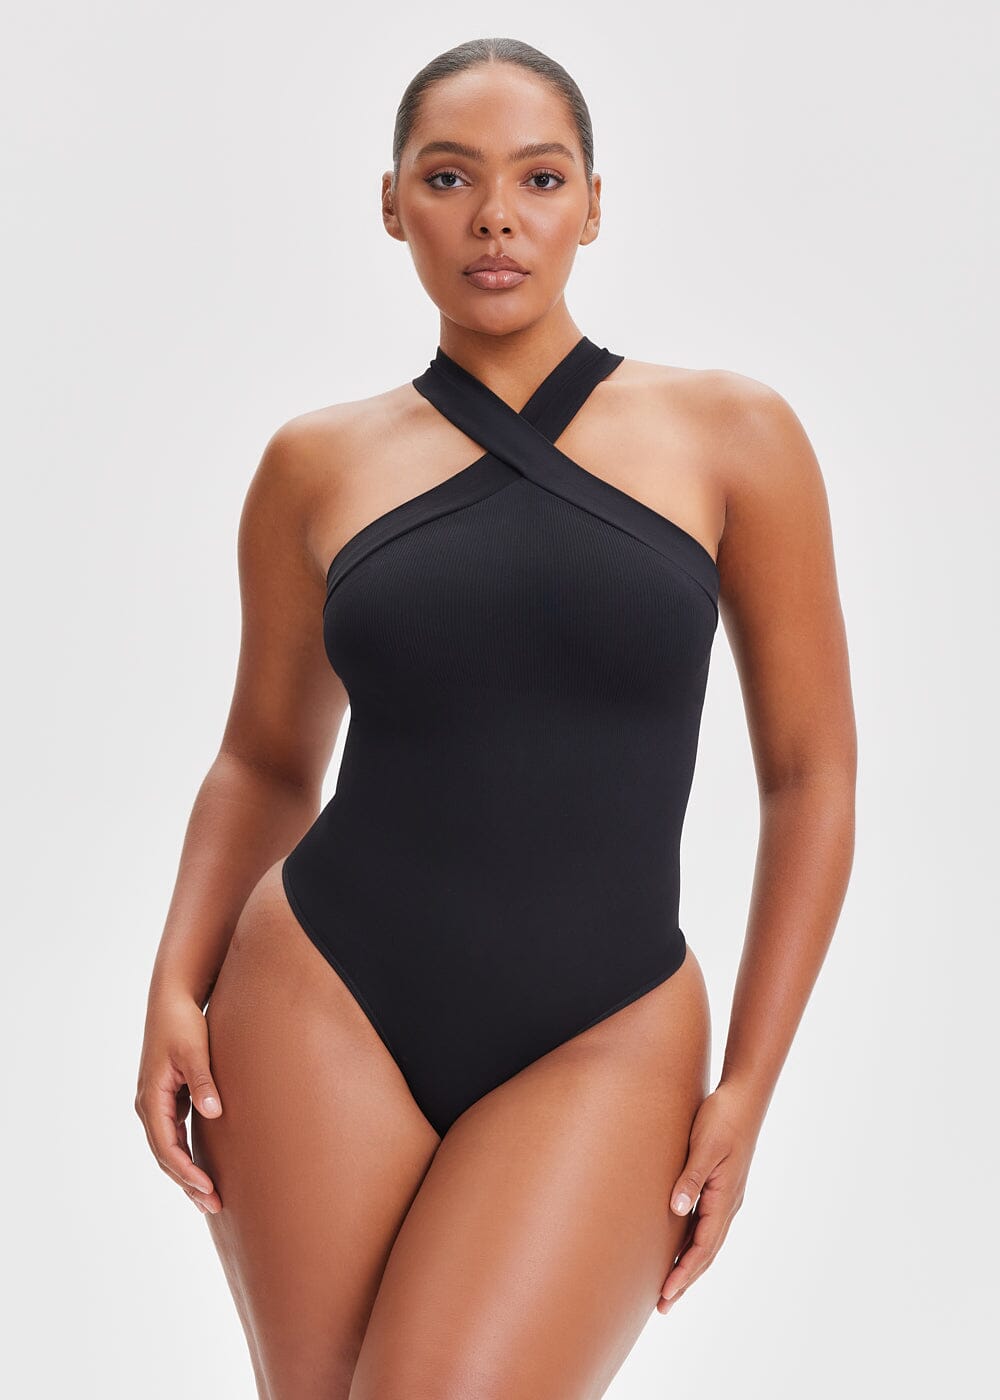 Our Crossover Halter Bodysuit Thong is the perfect addition to any